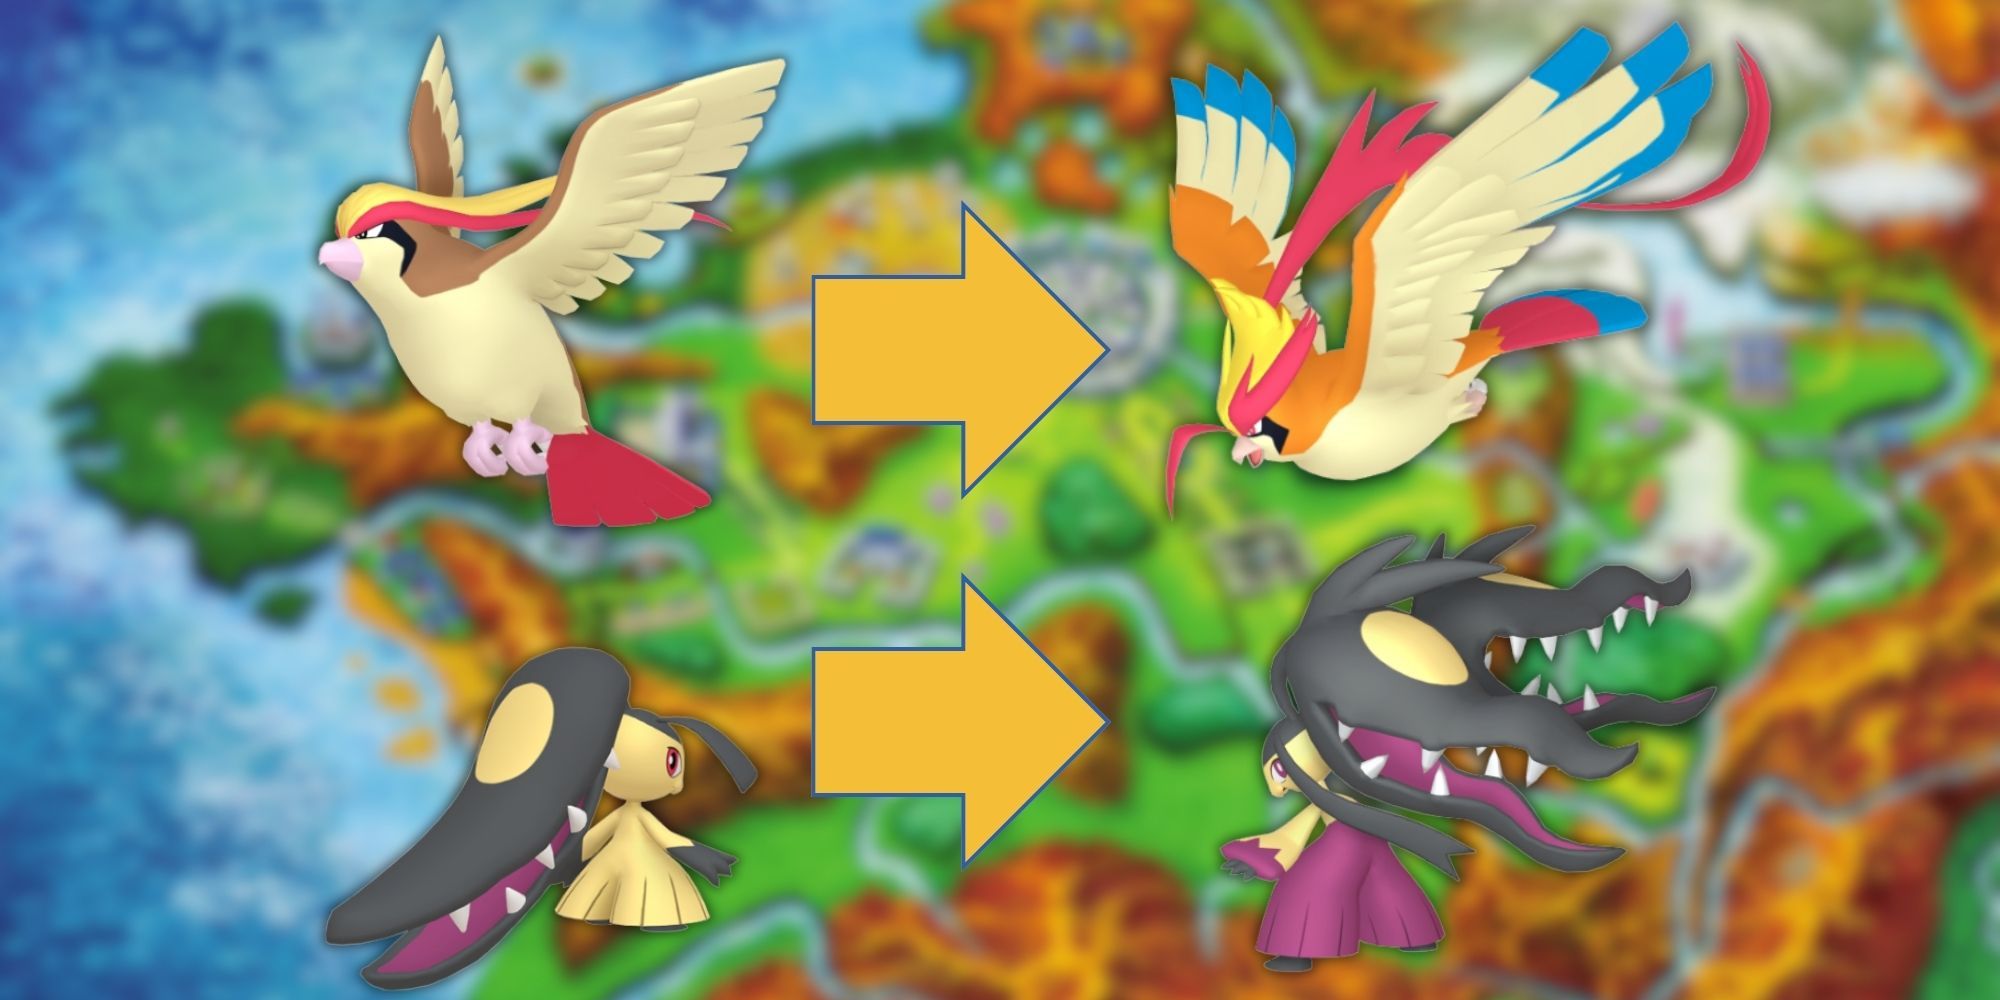 Examples of some Pokemon that were improved by their Mega Evolution, namely Mega Pidgeot and Mega Mawile.